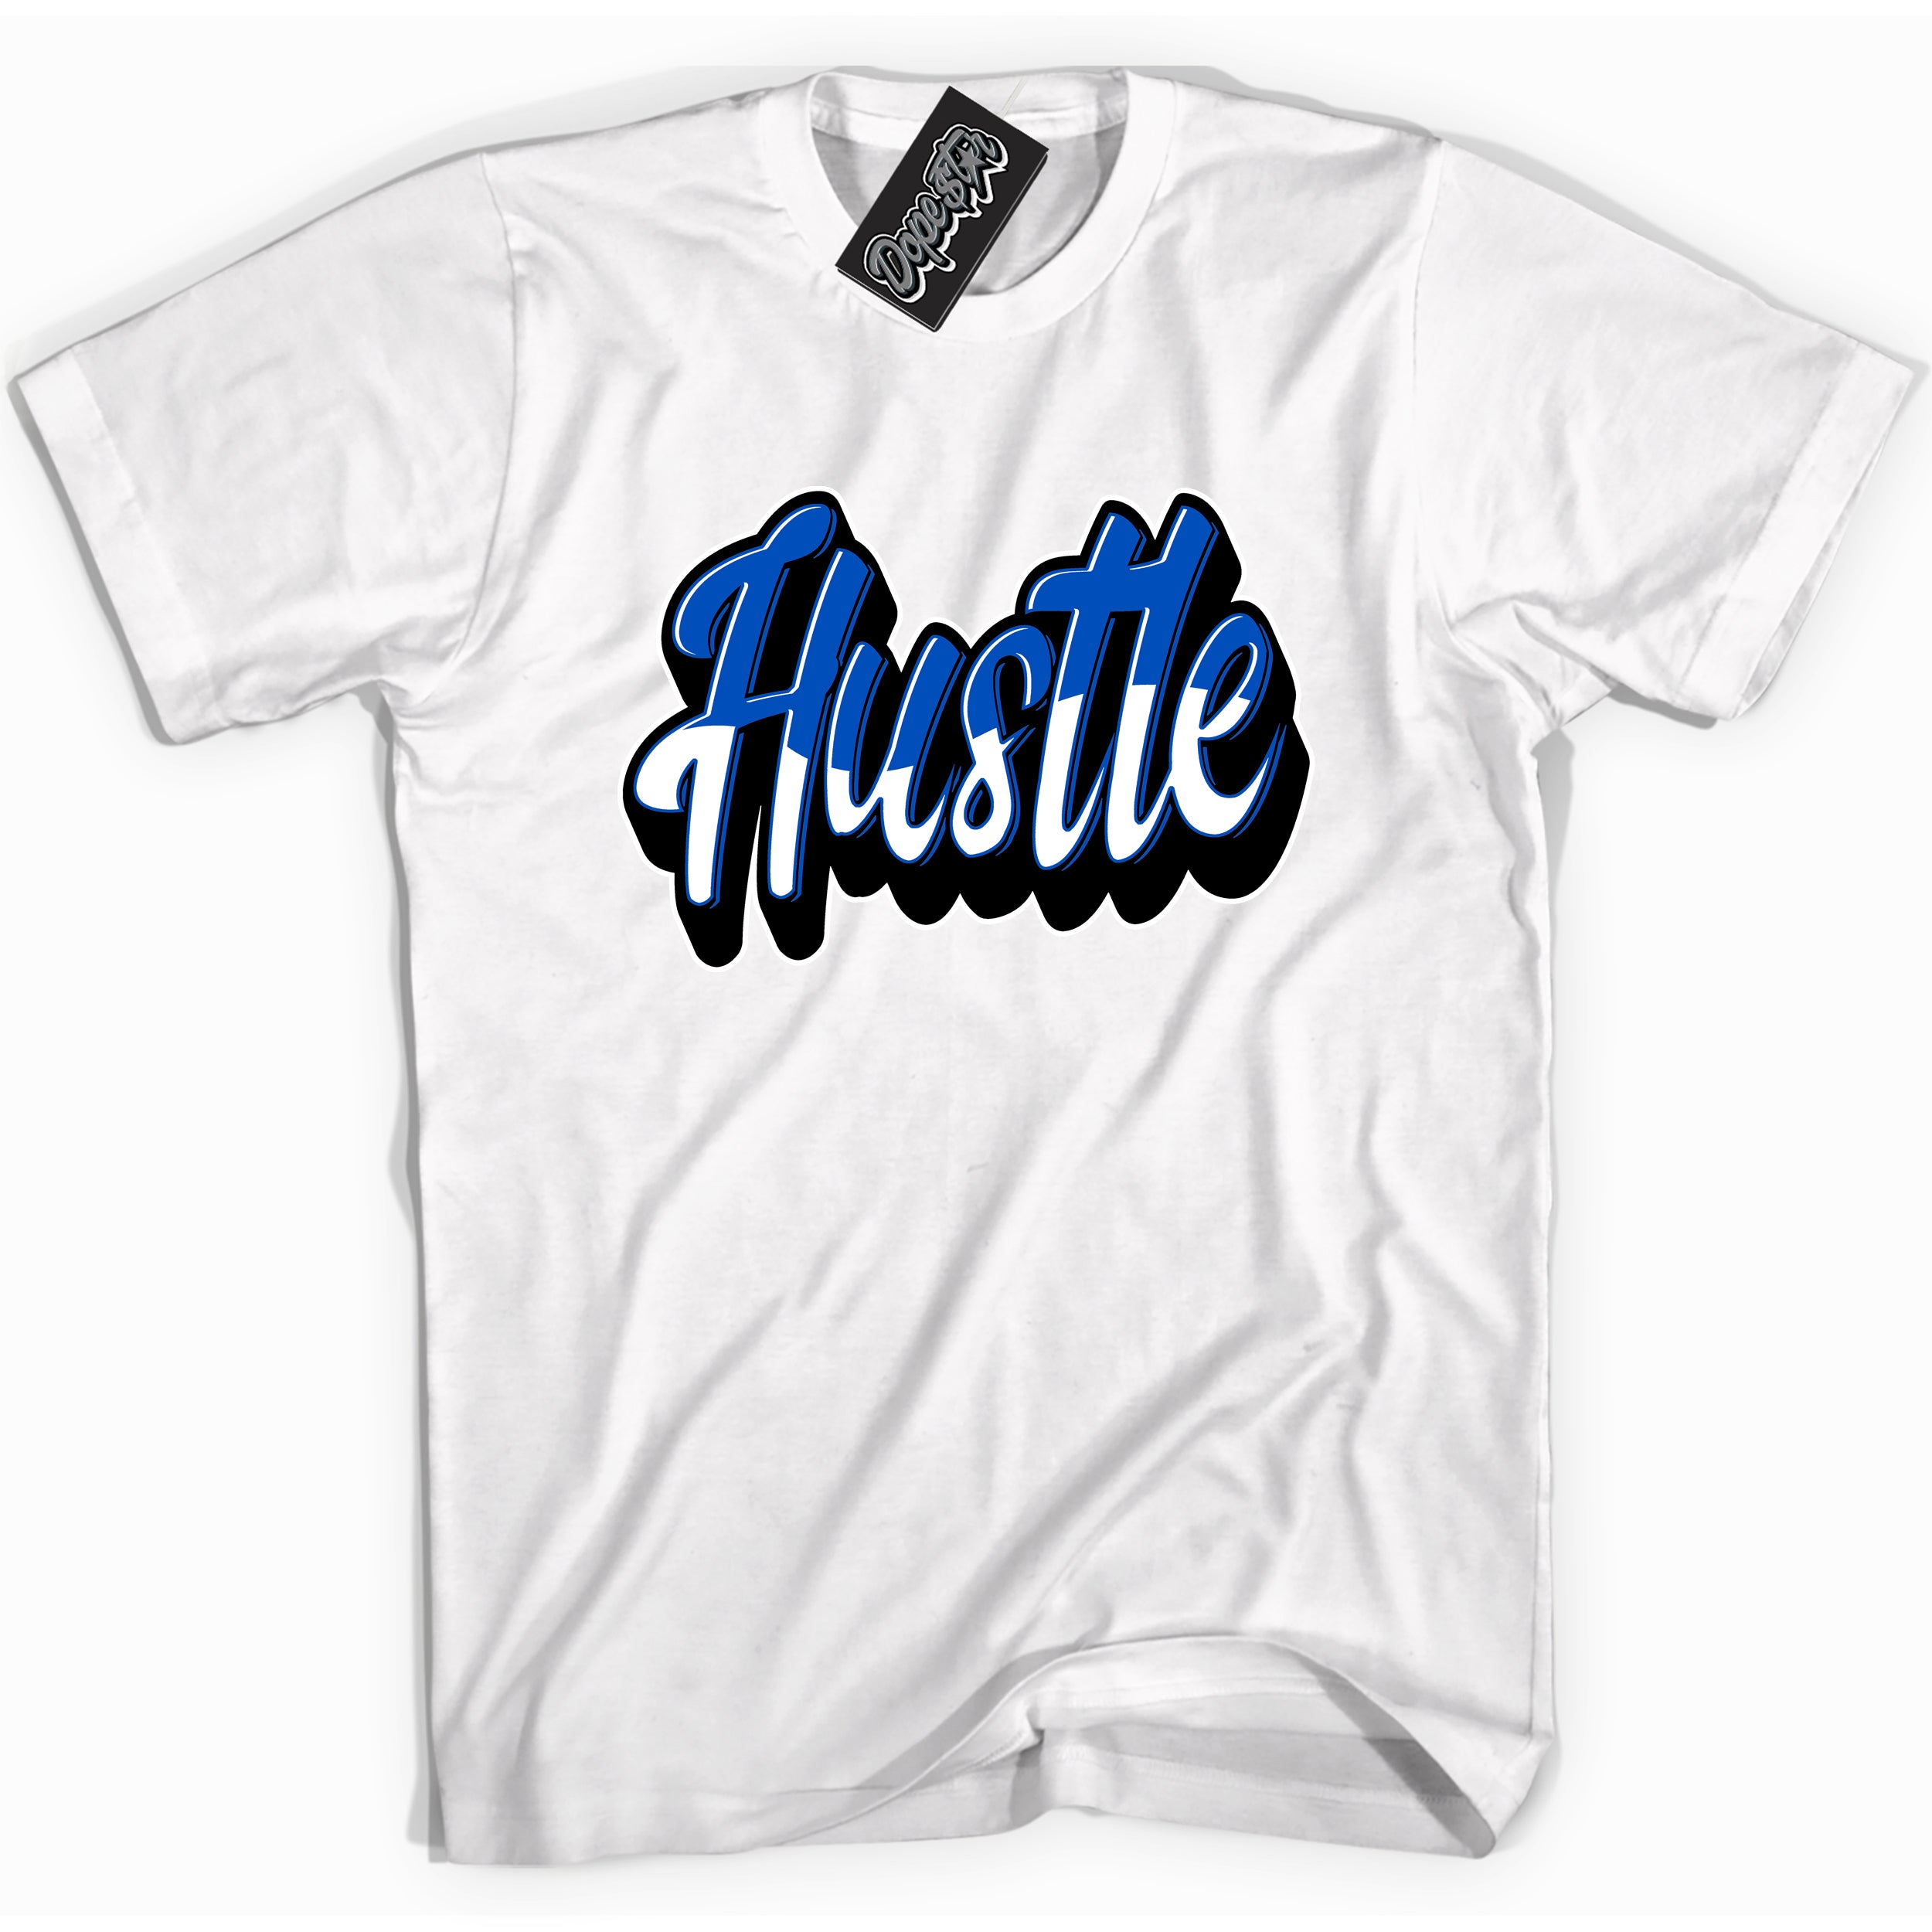 Cool White graphic tee with "Hustle 2" design, that perfectly matches Royal Reimagined 1s sneakers 